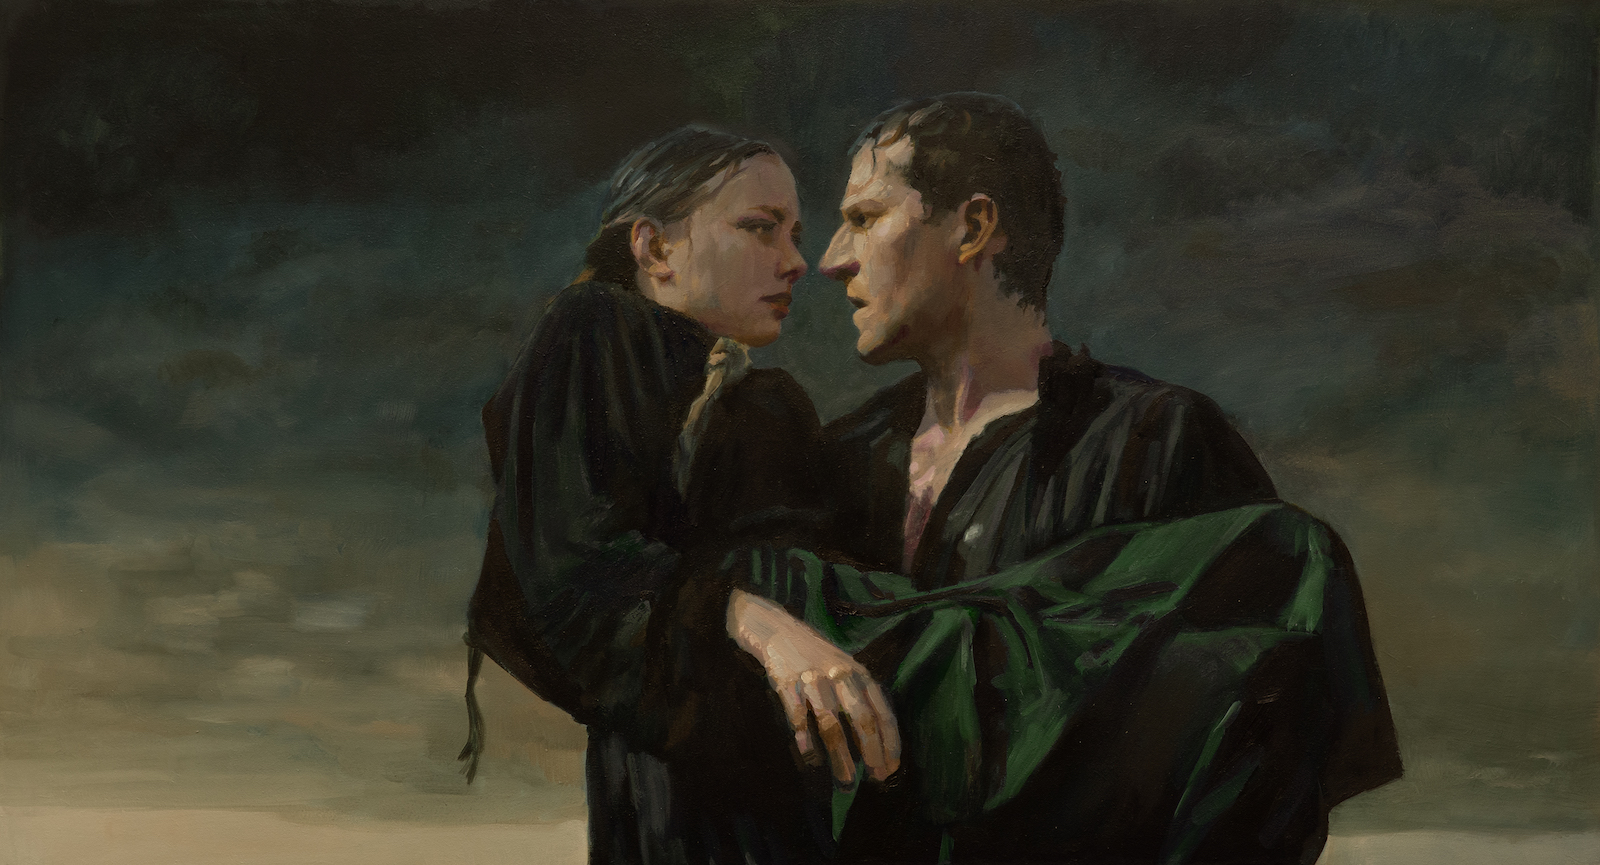 An oil painting style image of a man holding a woman in his arms against a dark clouded sky